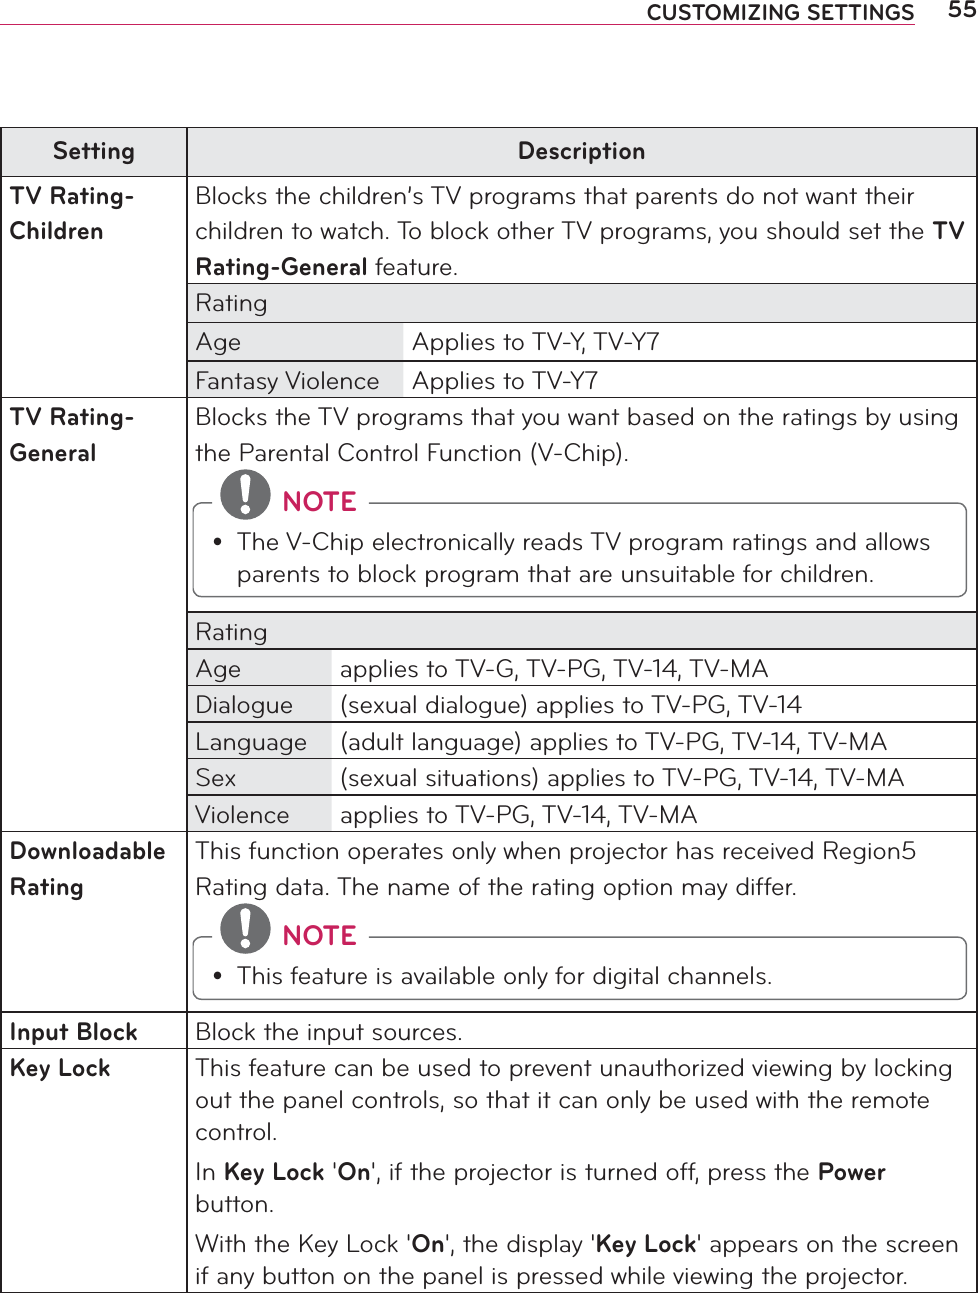 55CUSTOMIZING SETTINGSSetting DescriptionTV Rating-ChildrenBlocks the children’s TV programs that parents do not want their children to watch. To block other TV programs, you should set the TV Rating-General feature.RatingAge Applies to TV-Y, TV-Y7Fantasy Violence Applies to TV-Y7TV Rating-GeneralBlocks the TV programs that you want based on the ratings by using the Parental Control Function (V-Chip). NOTEy The V-Chip electronically reads TV program ratings and allows parents to block program that are unsuitable for children.RatingAge applies to TV-G, TV-PG, TV-14, TV-MADialogue (sexual dialogue) applies to TV-PG, TV-14Language (adult language) applies to TV-PG, TV-14, TV-MASex (sexual situations) applies to TV-PG, TV-14, TV-MAViolence applies to TV-PG, TV-14, TV-MADownloadable RatingThis function operates only when projector has received Region5 Rating data. The name of the rating option may differ. NOTEy This feature is available only for digital channels.Input Block Block the input sources.Key Lock This feature can be used to prevent unauthorized viewing by locking out the panel controls, so that it can only be used with the remote control.In Key Lock &apos;On&apos;, if the projector is turned off, press the Power button.With the Key Lock &apos;On&apos;, the display &apos;Key Lock&apos; appears on the screen if any button on the panel is pressed while viewing the projector.